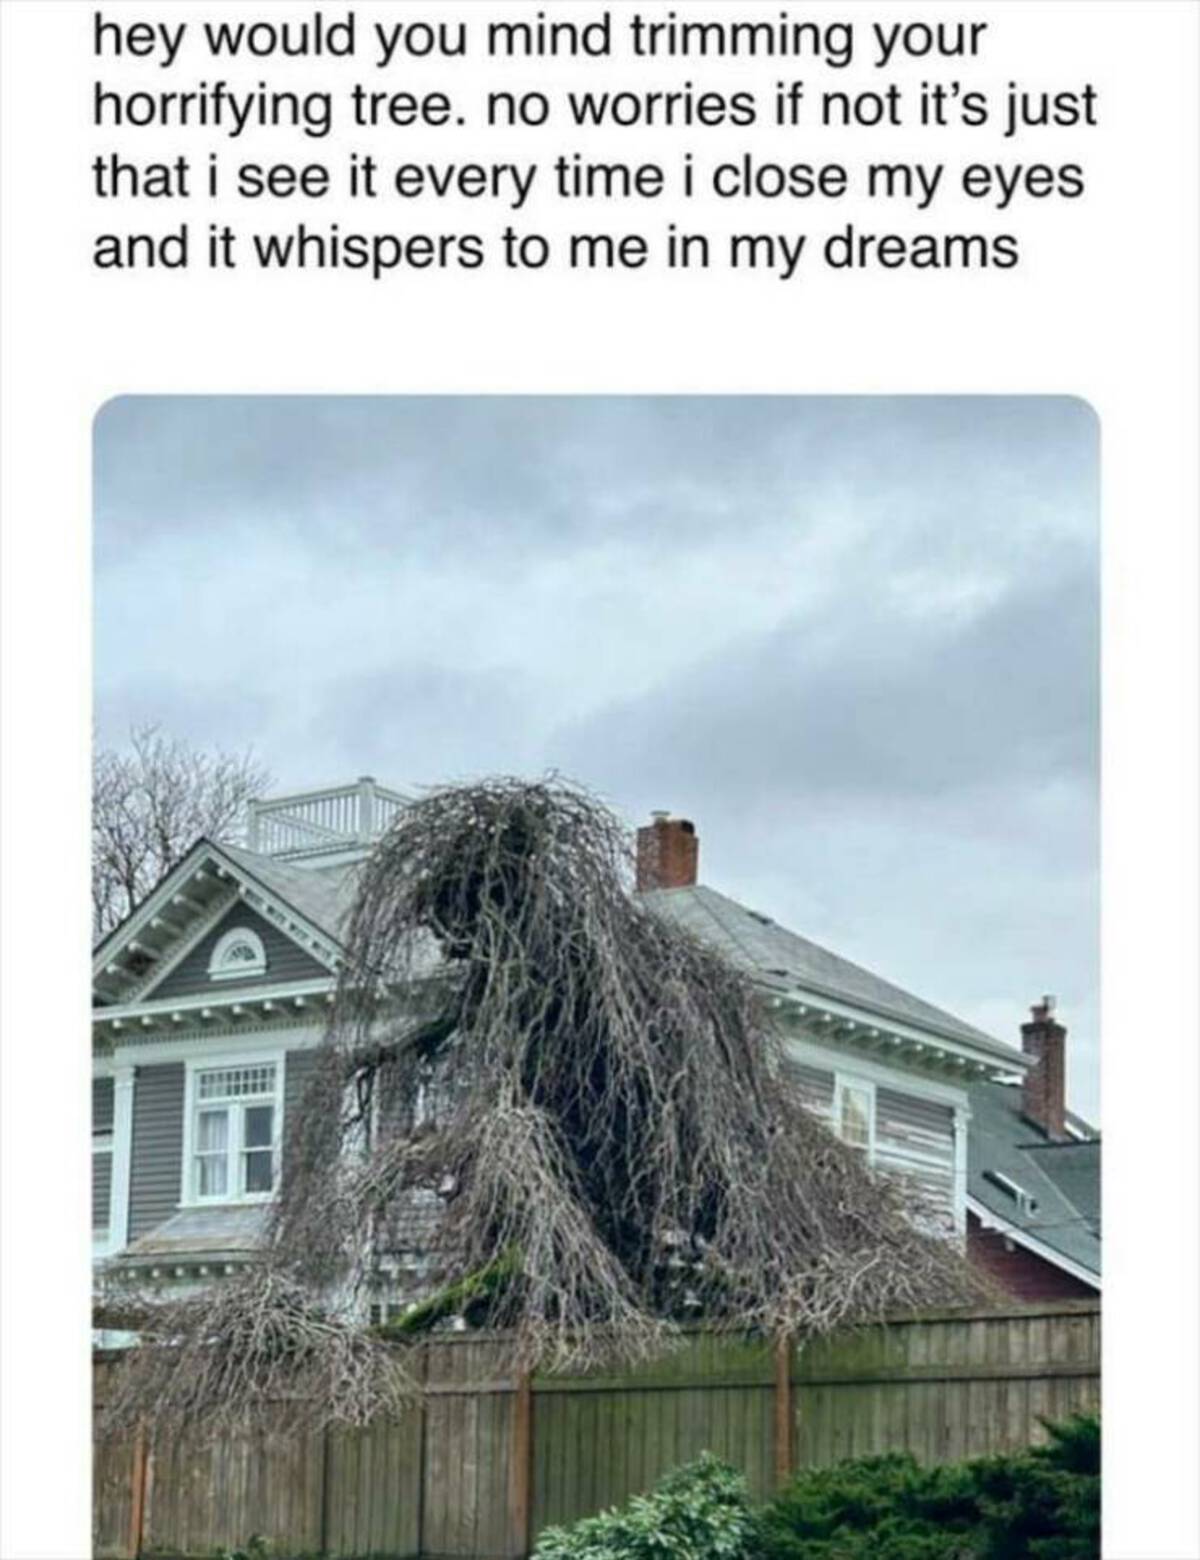 hey would you mind trimming your terrifying tree - hey would you mind trimming your horrifying tree. no worries if not it's just that i see it every time i close my eyes and it whispers to me in my dreams